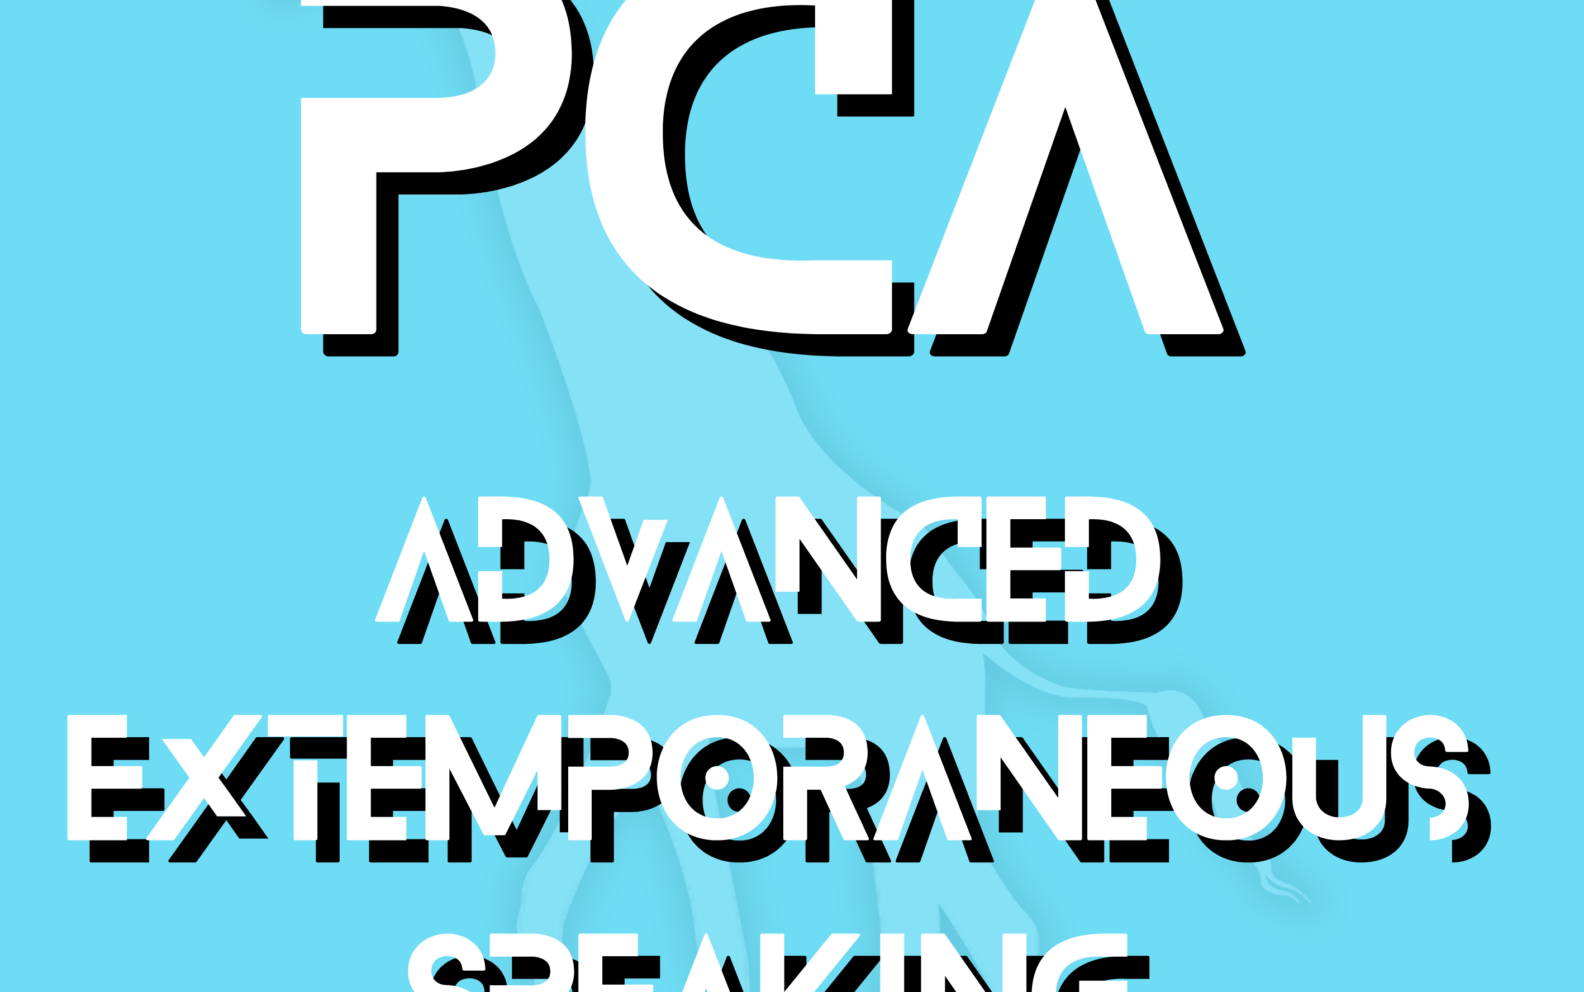 Online Course for Extemporaneous Speaking